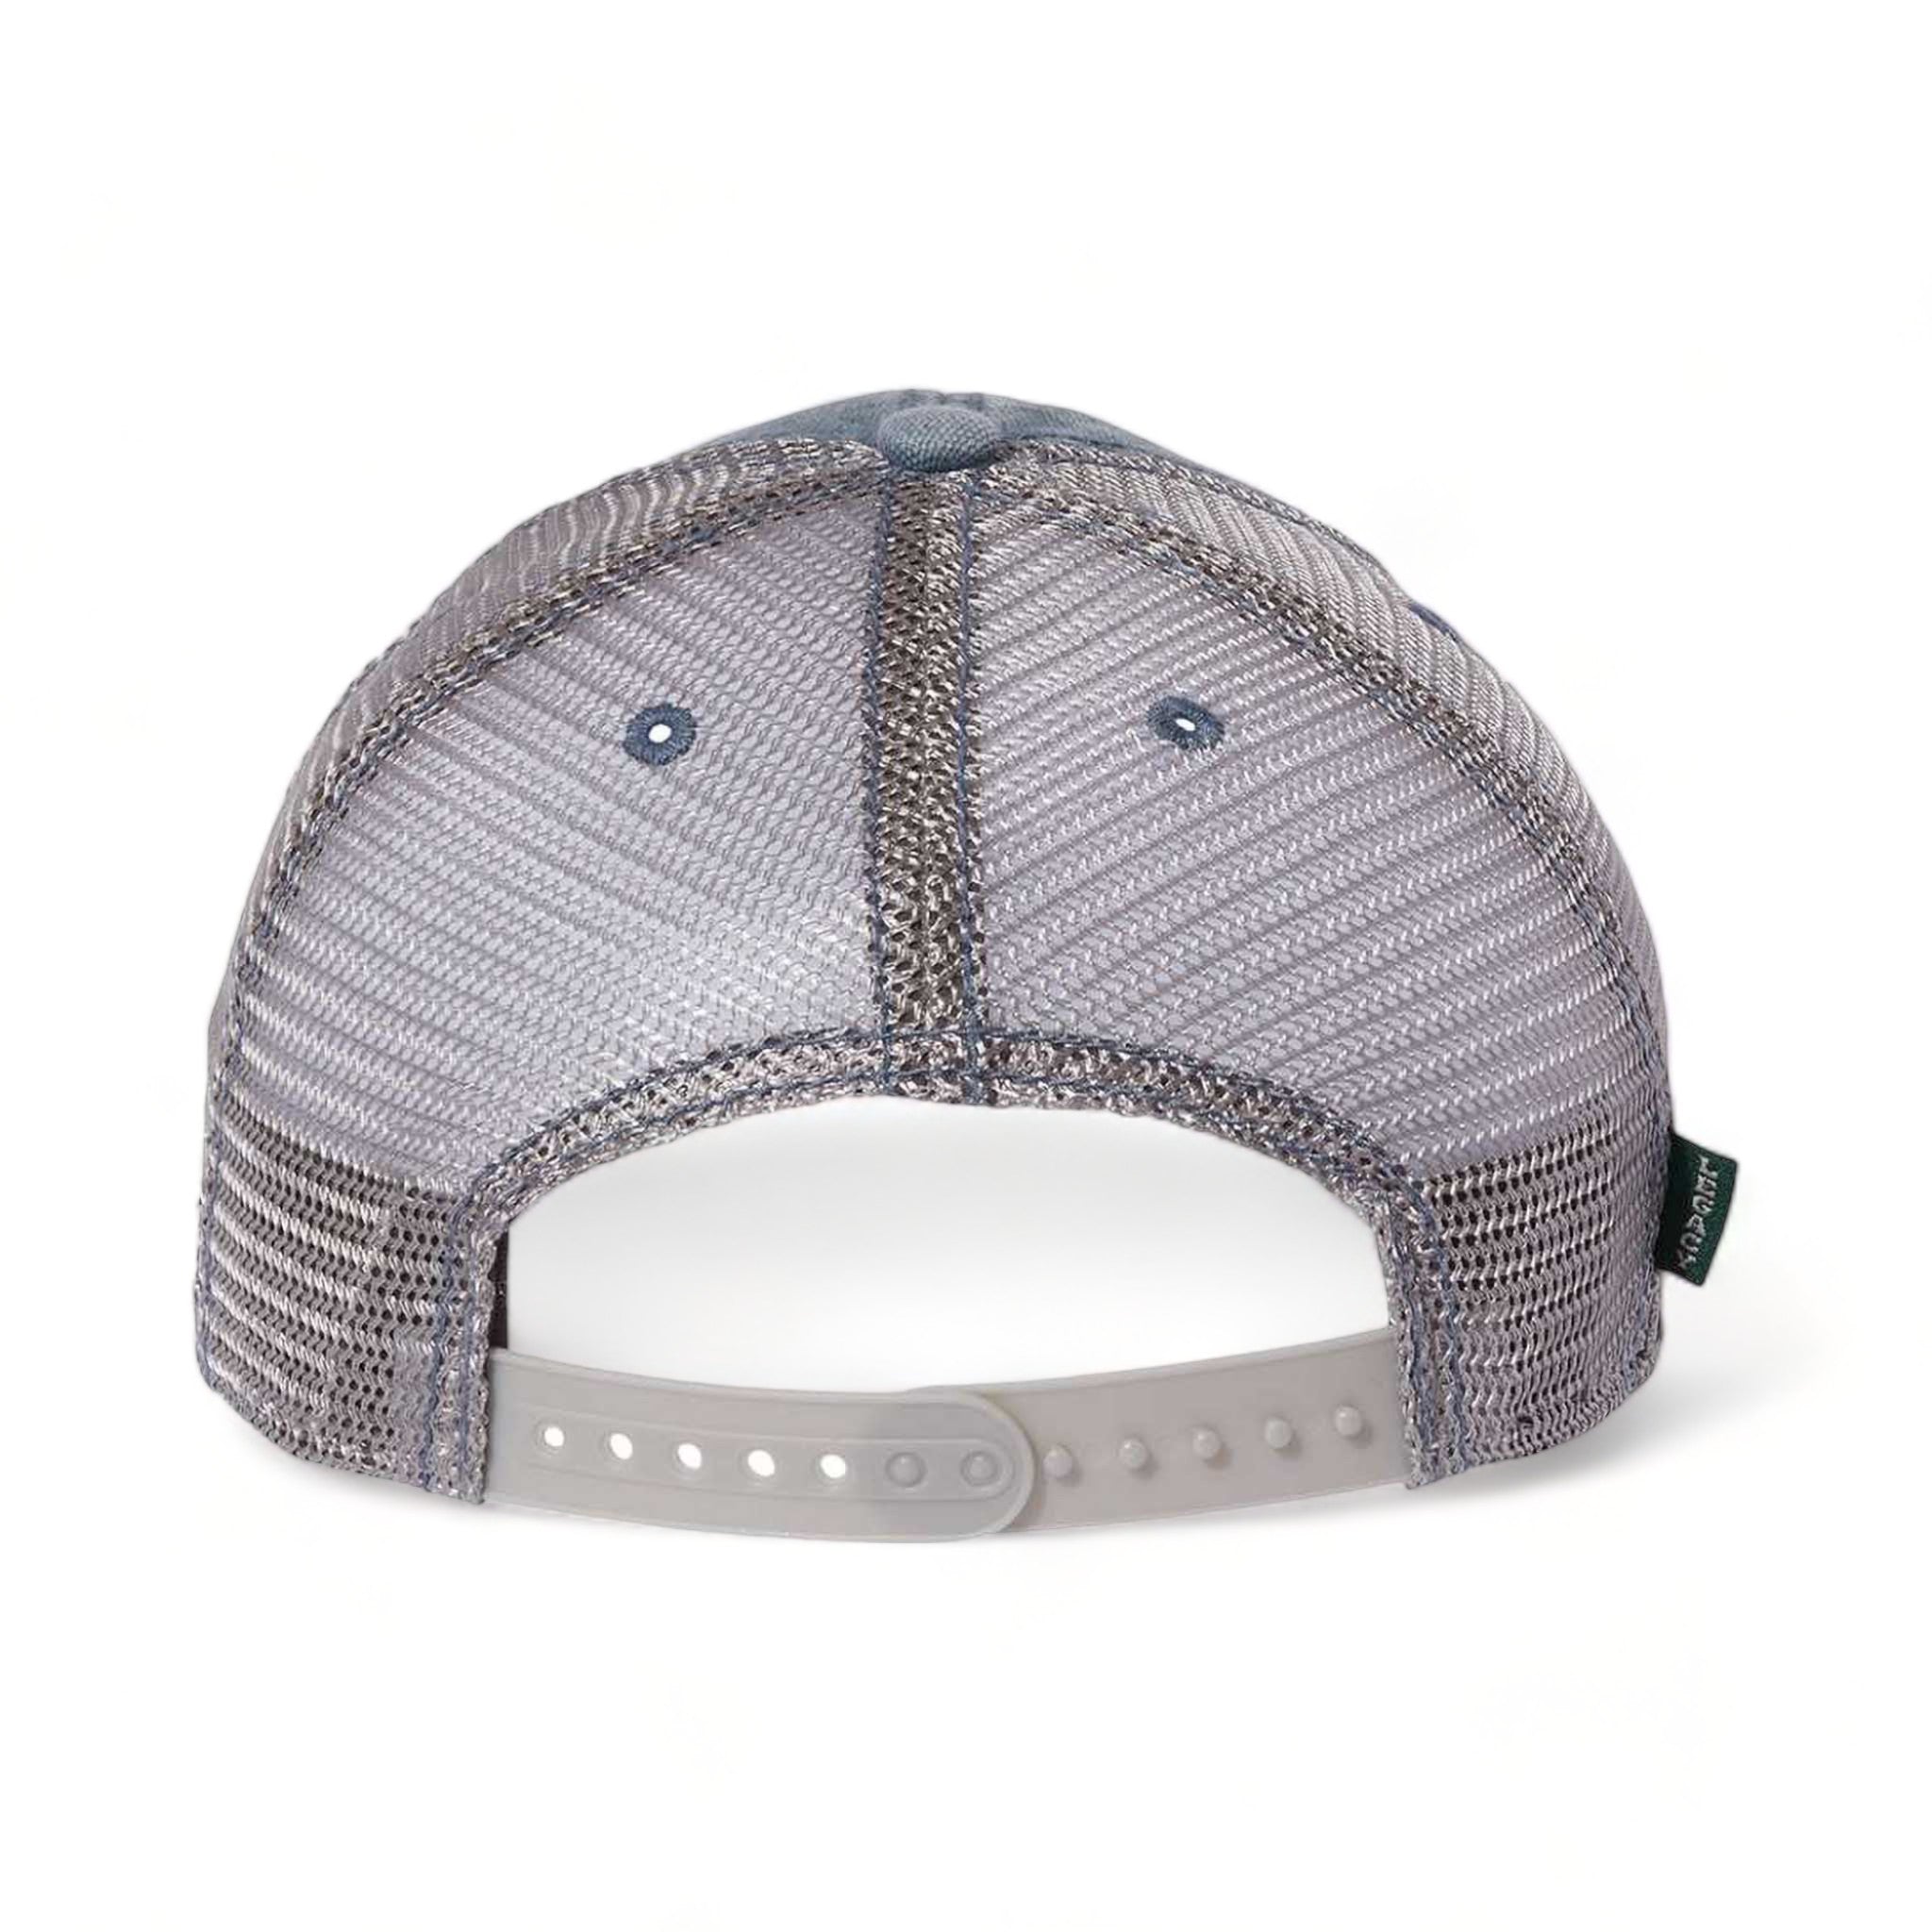 Back view of LEGACY DTA custom hat in blue steel and grey